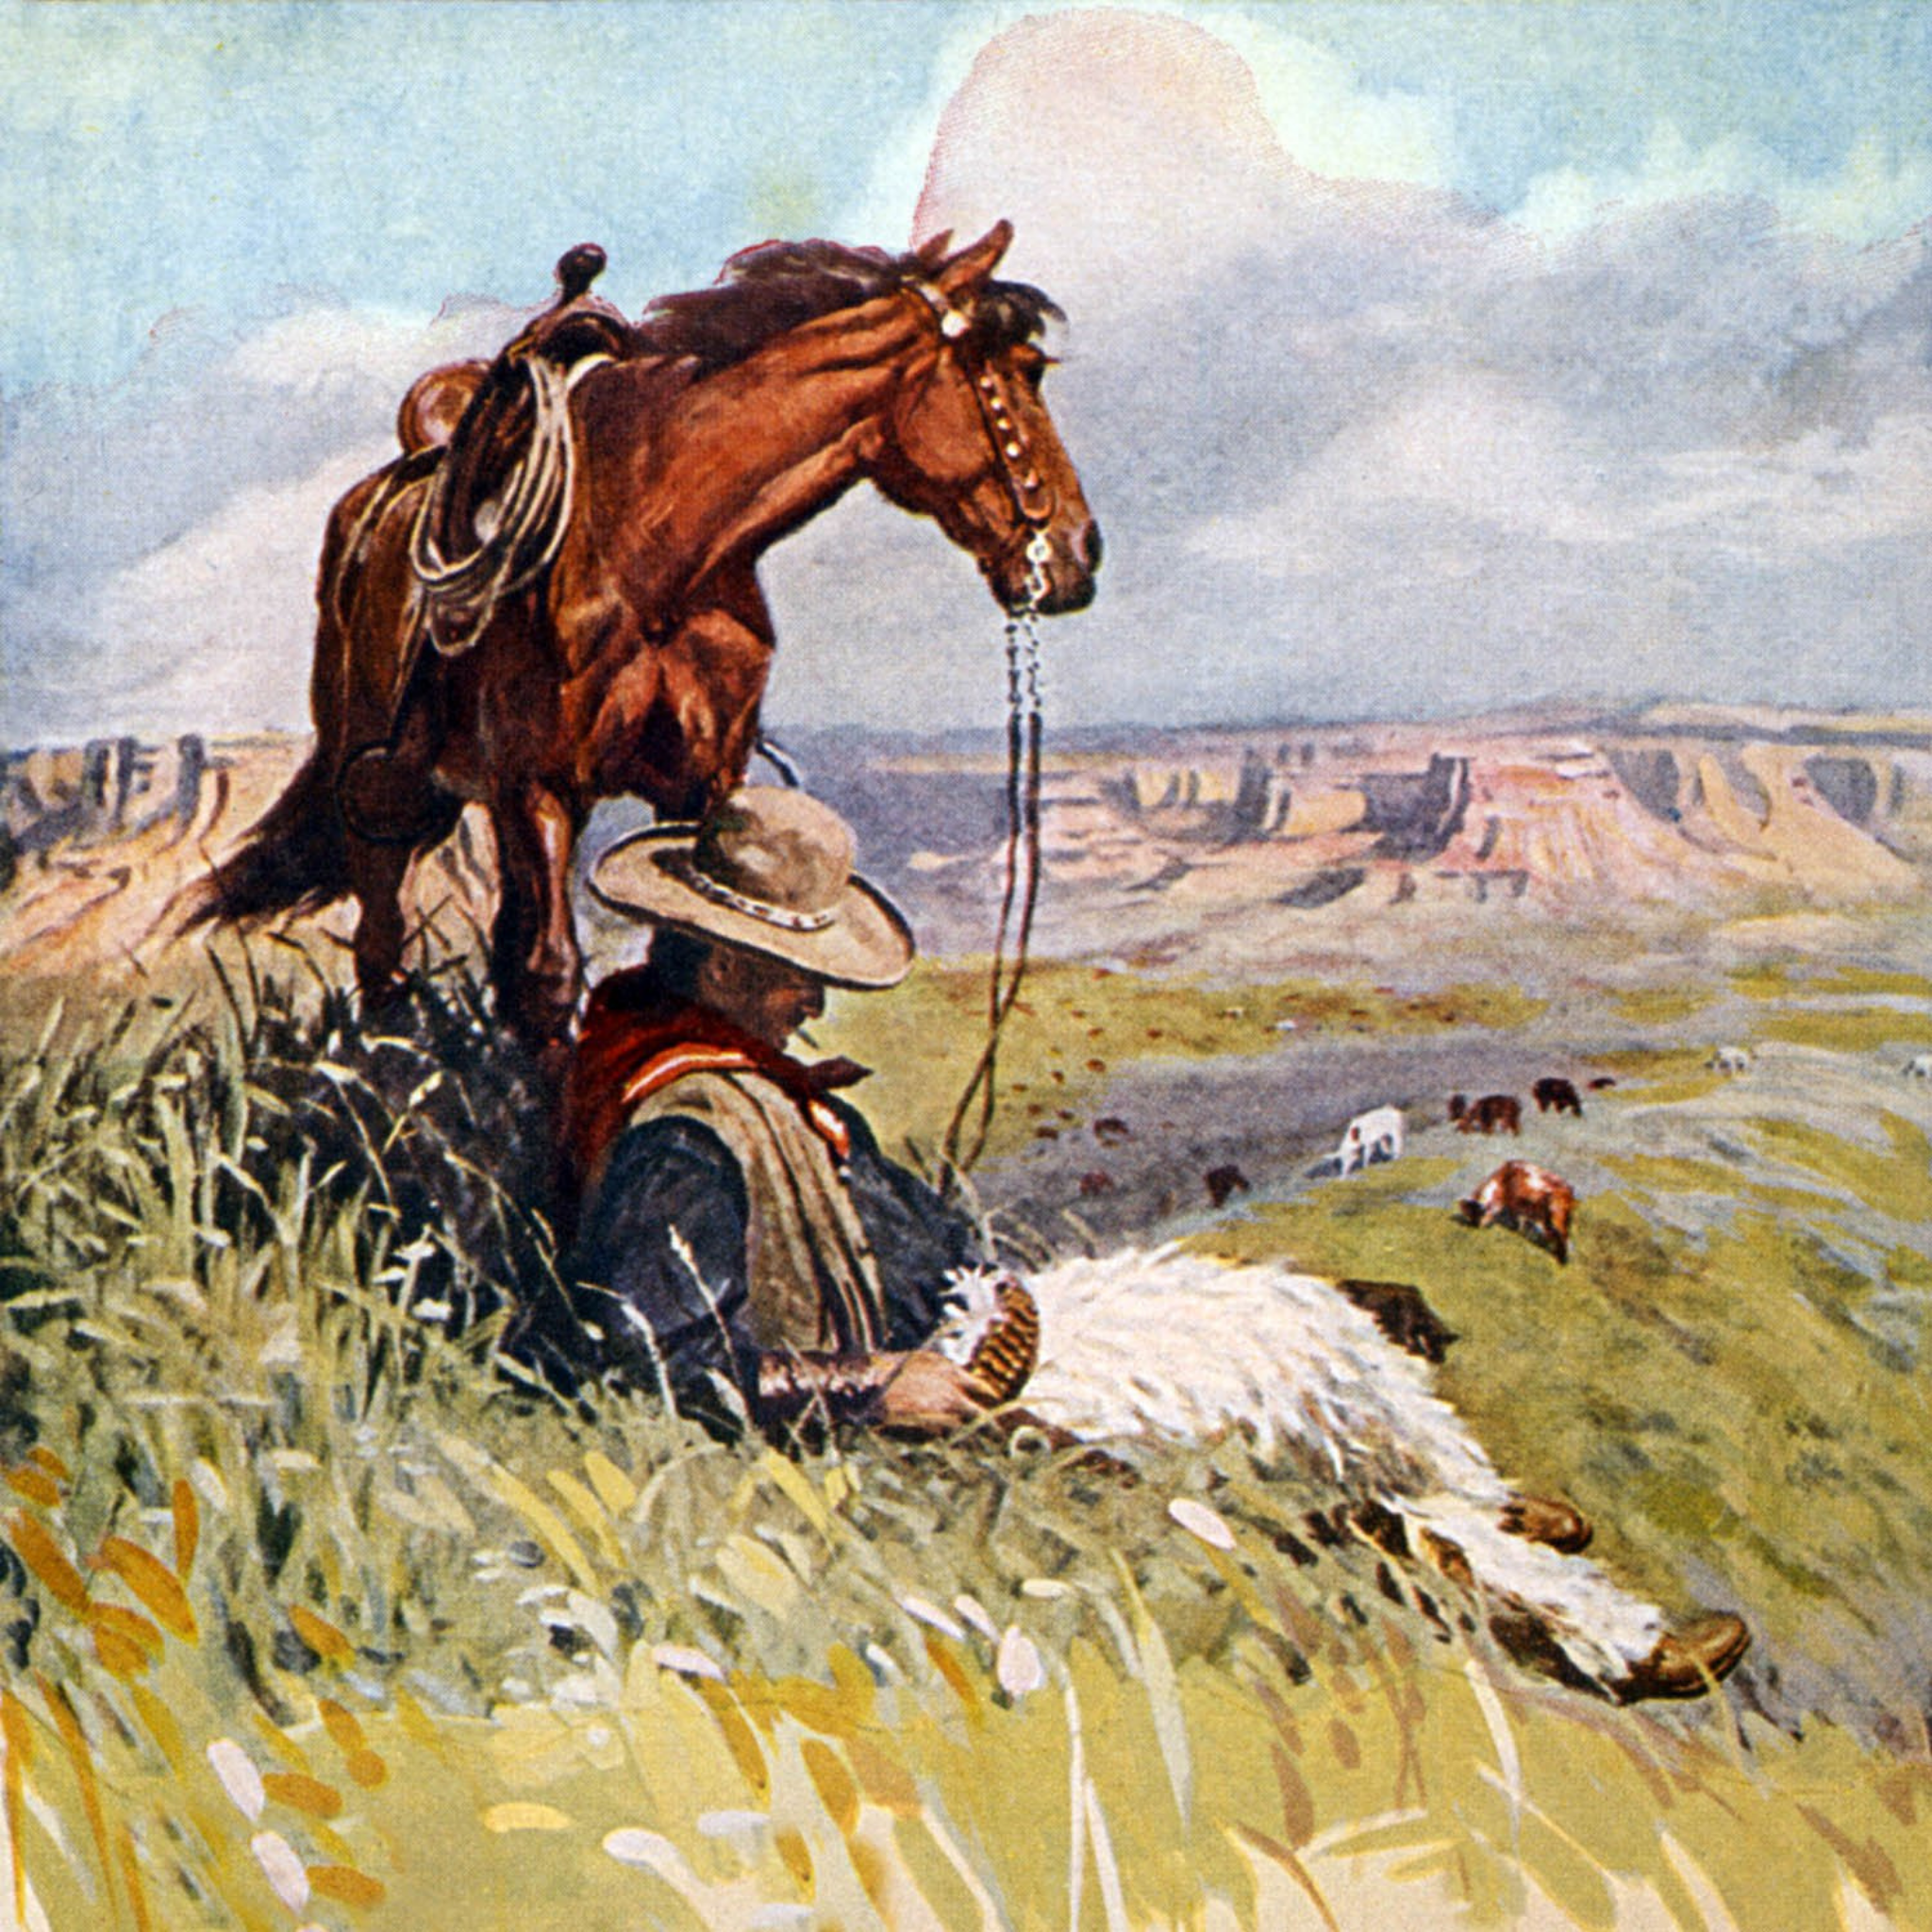 Cowboy Daydreaming - ca. 1915 Lithograph